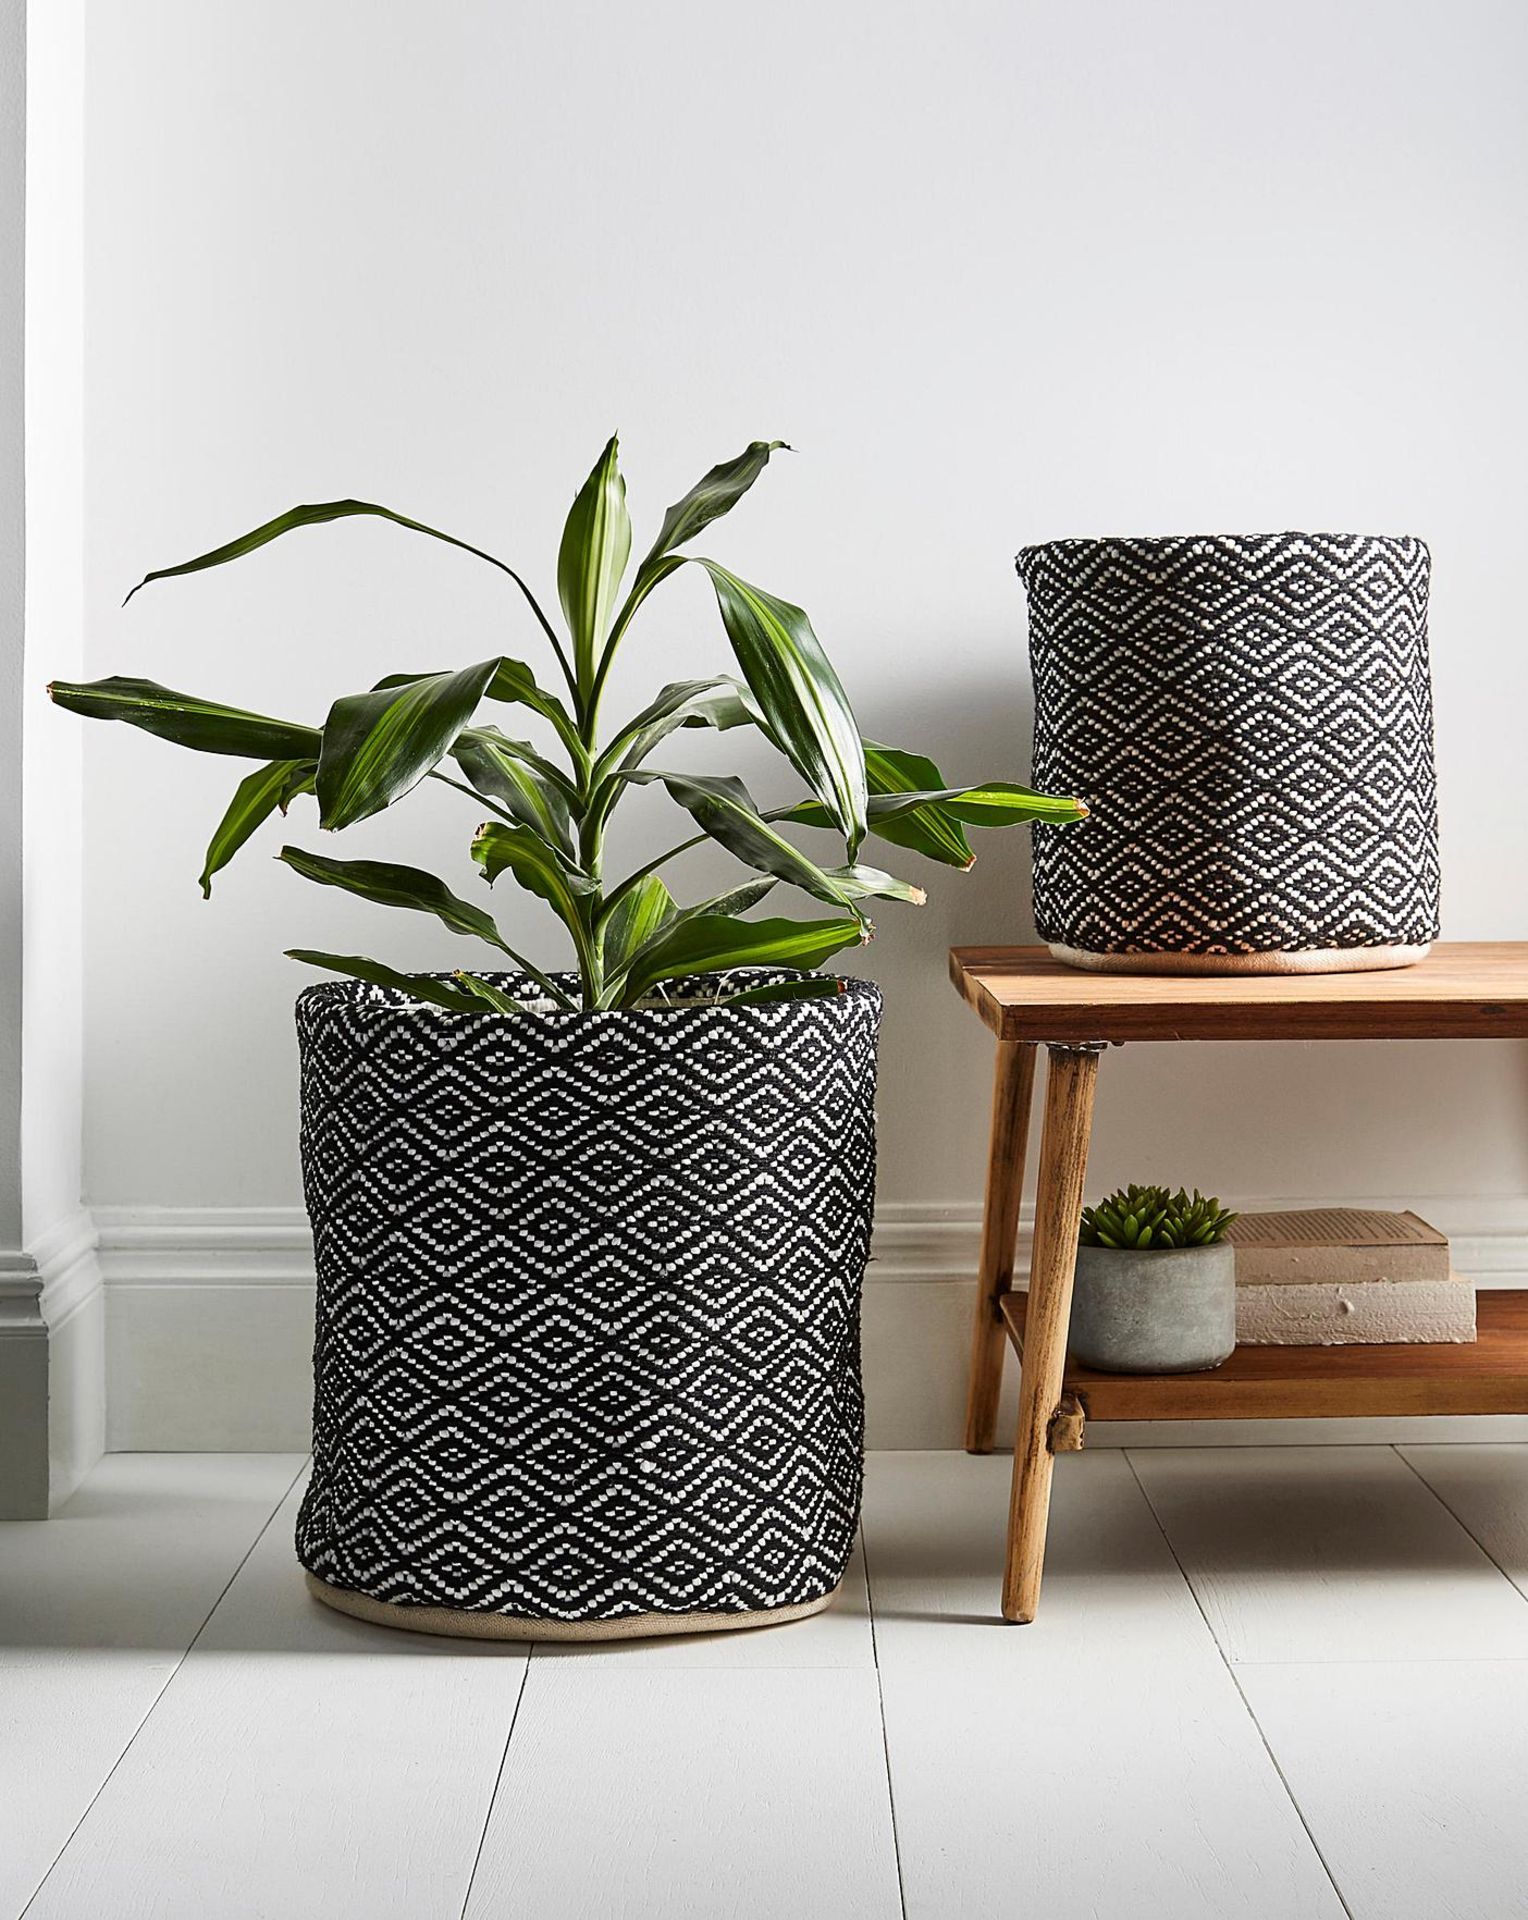 3x BRAND NEW Set of 2 Monochrome Woven Baskets. RRP £40 EACH. These lovely monochrome woven - Image 3 of 3